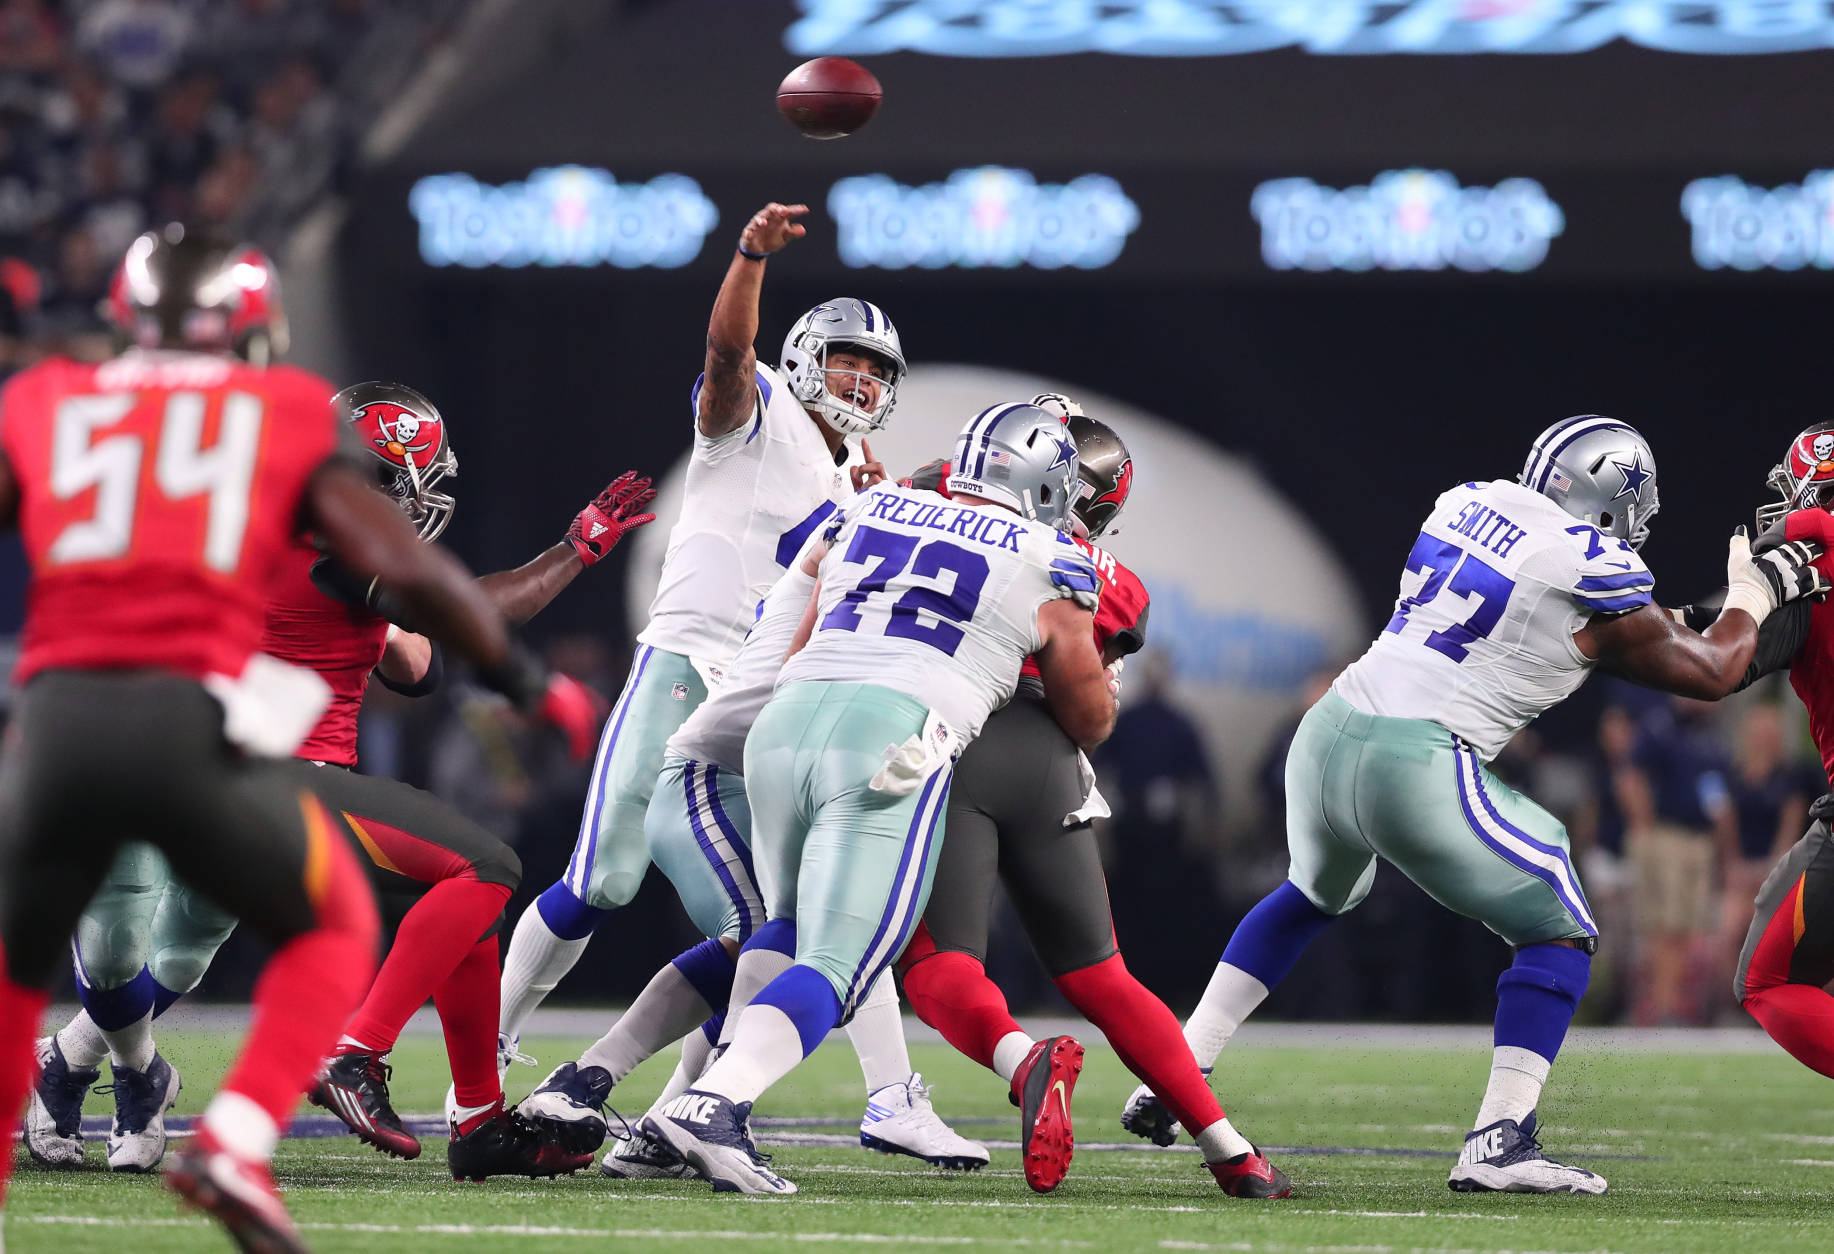 ARLINGTON, TX - DECEMBER 18:  Dak Prescott #4 of the Dallas Cowboys throws a pass during the second quarter against the Tampa Bay Buccaneers at AT&amp;T Stadium on December 18, 2016 in Arlington, Texas. (Photo by Tom Pennington/Getty Images)